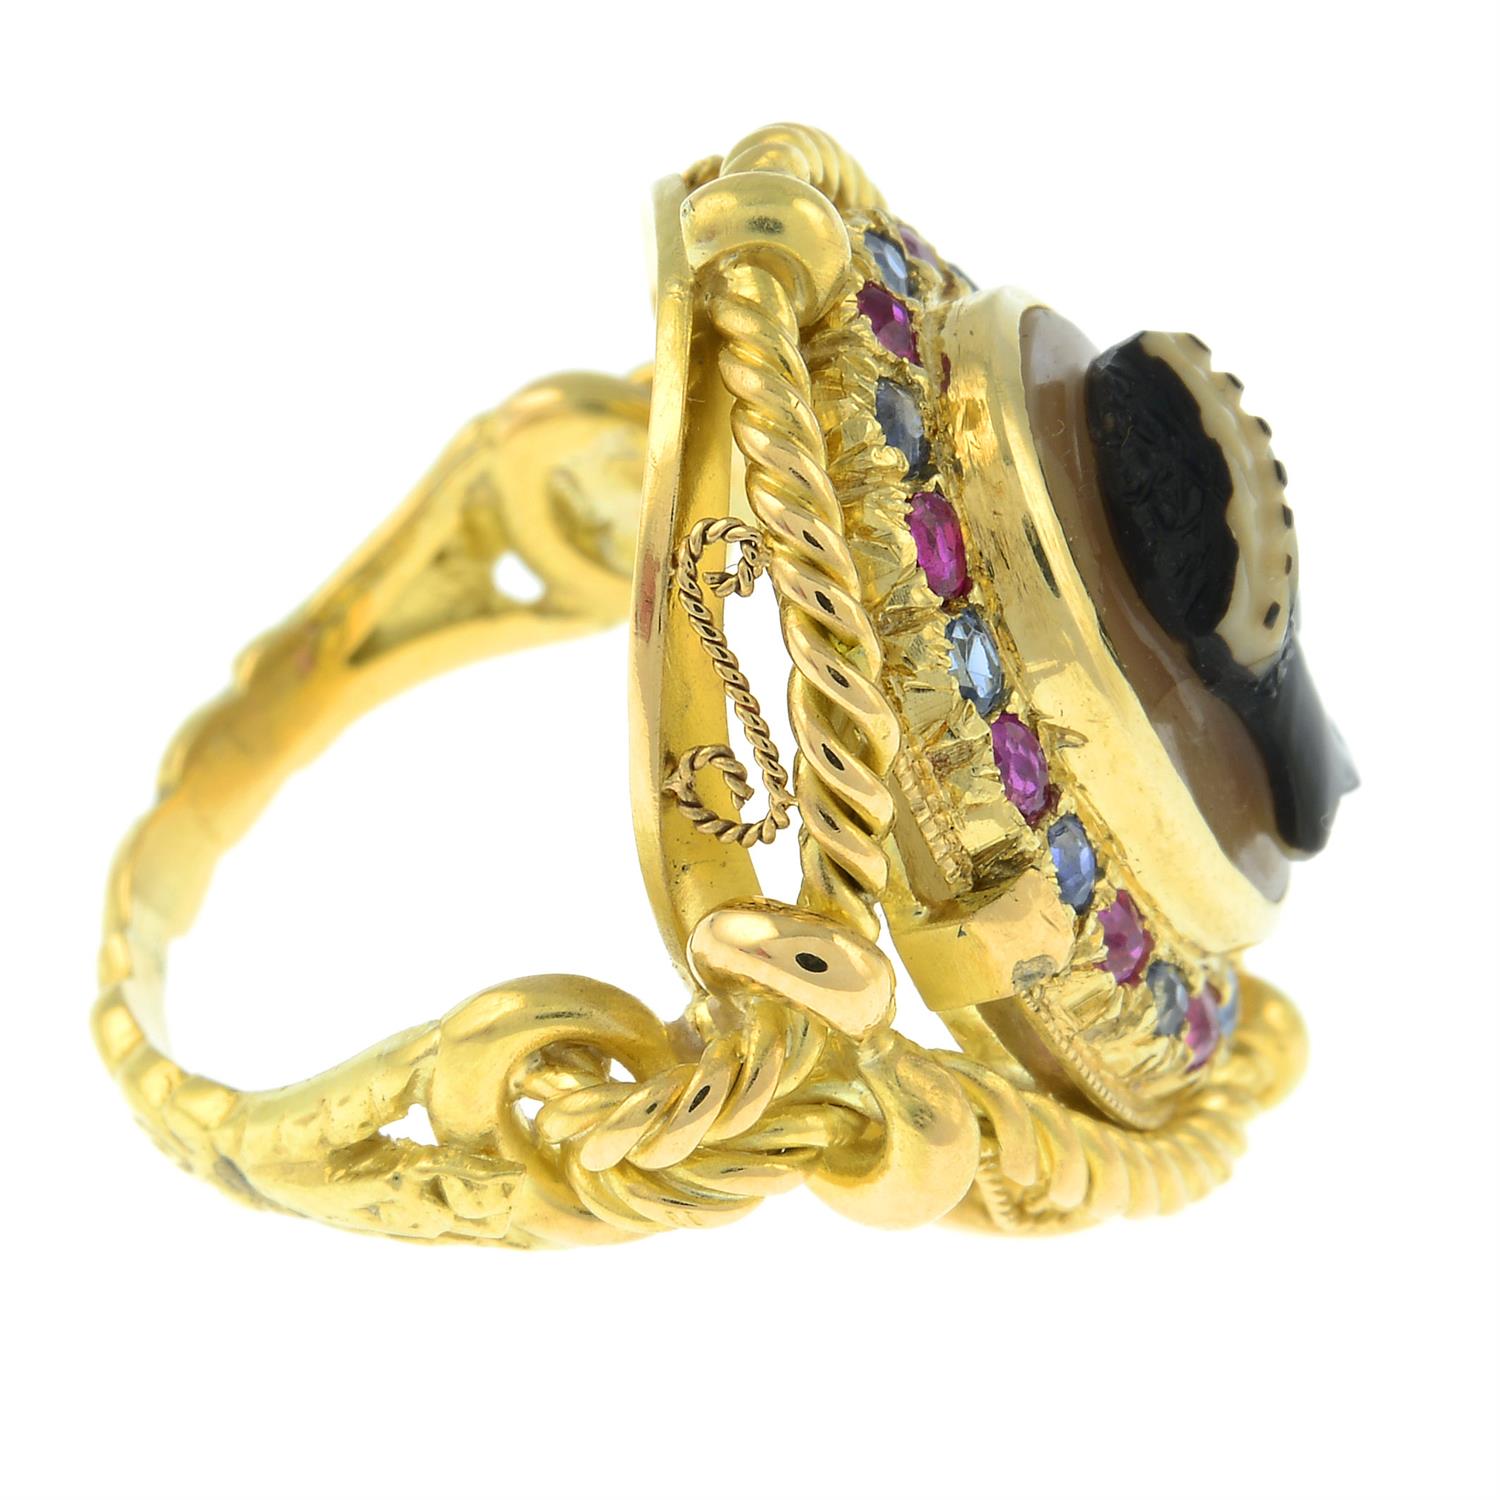 An onyx cameo, sapphire and ruby ring. - Image 4 of 6